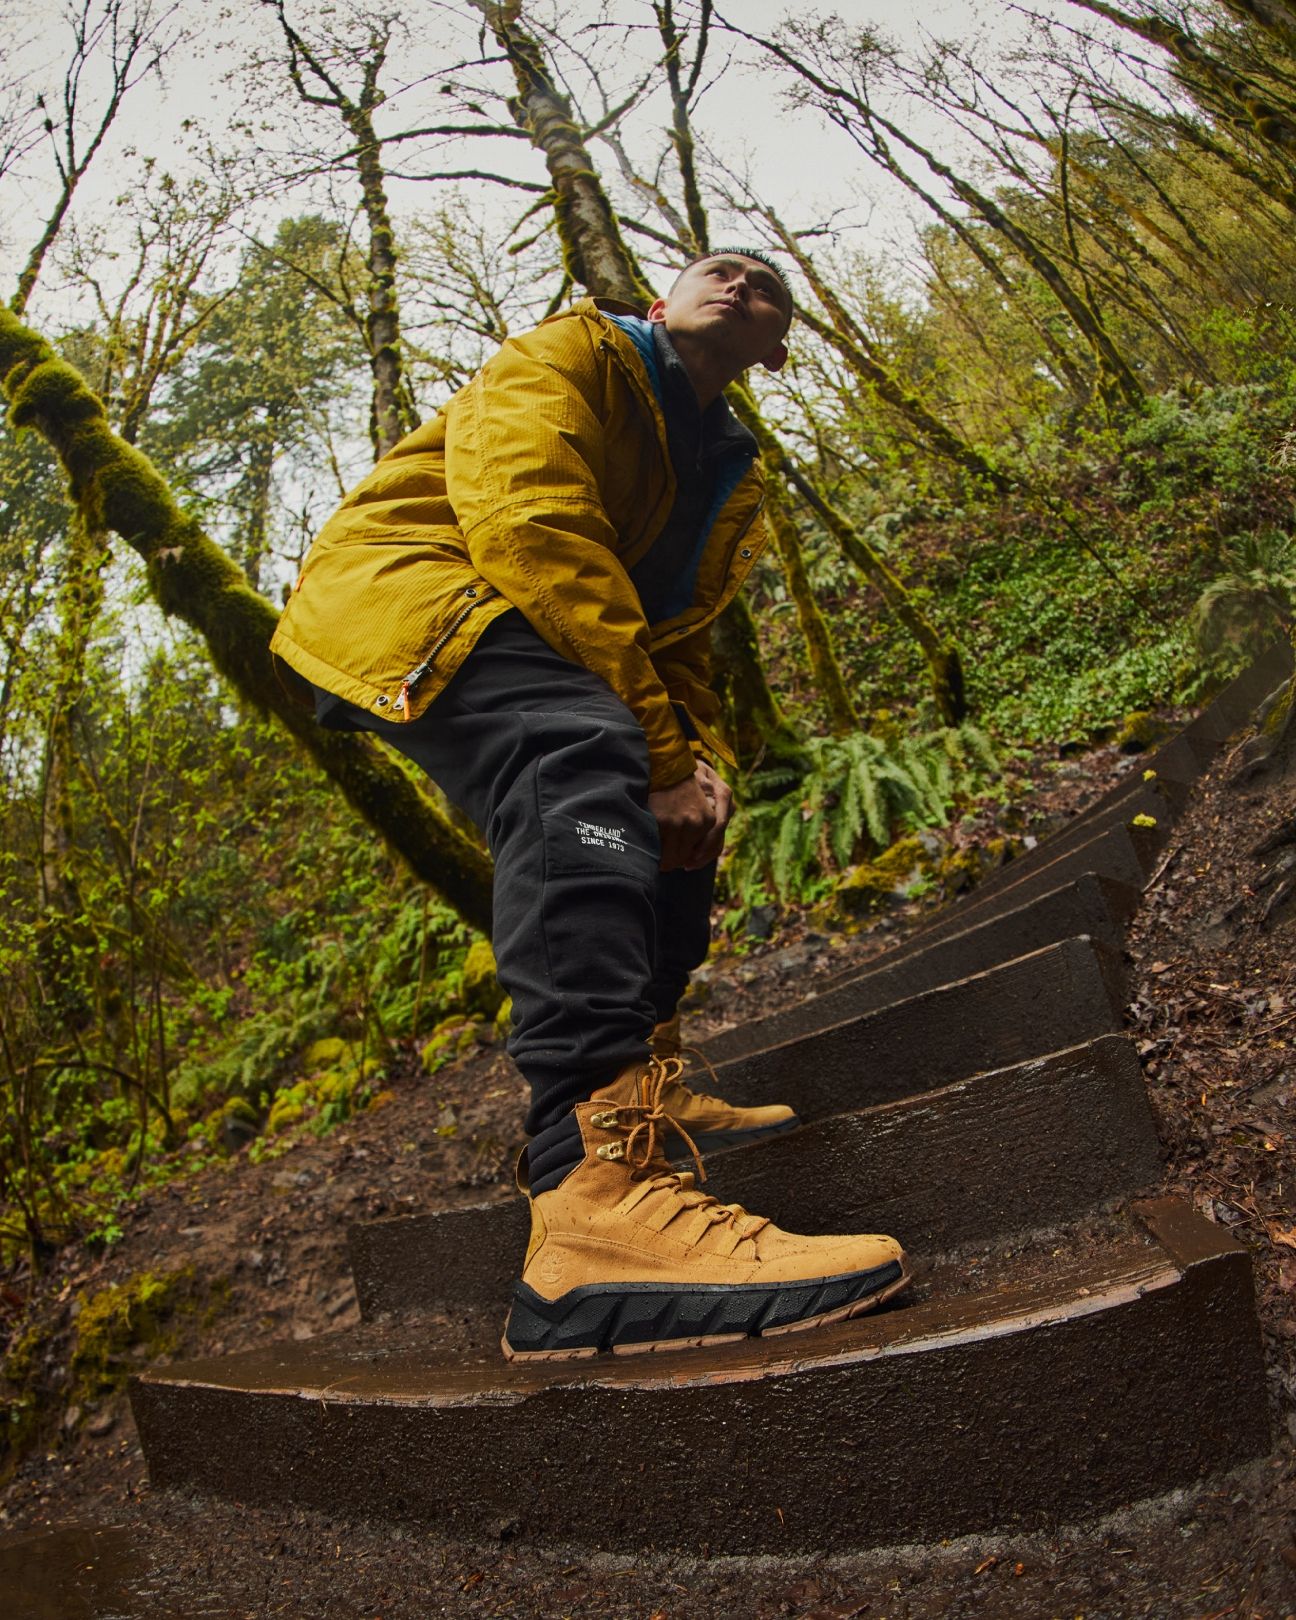 Marc on trail stairs with timberland boots and jacket.